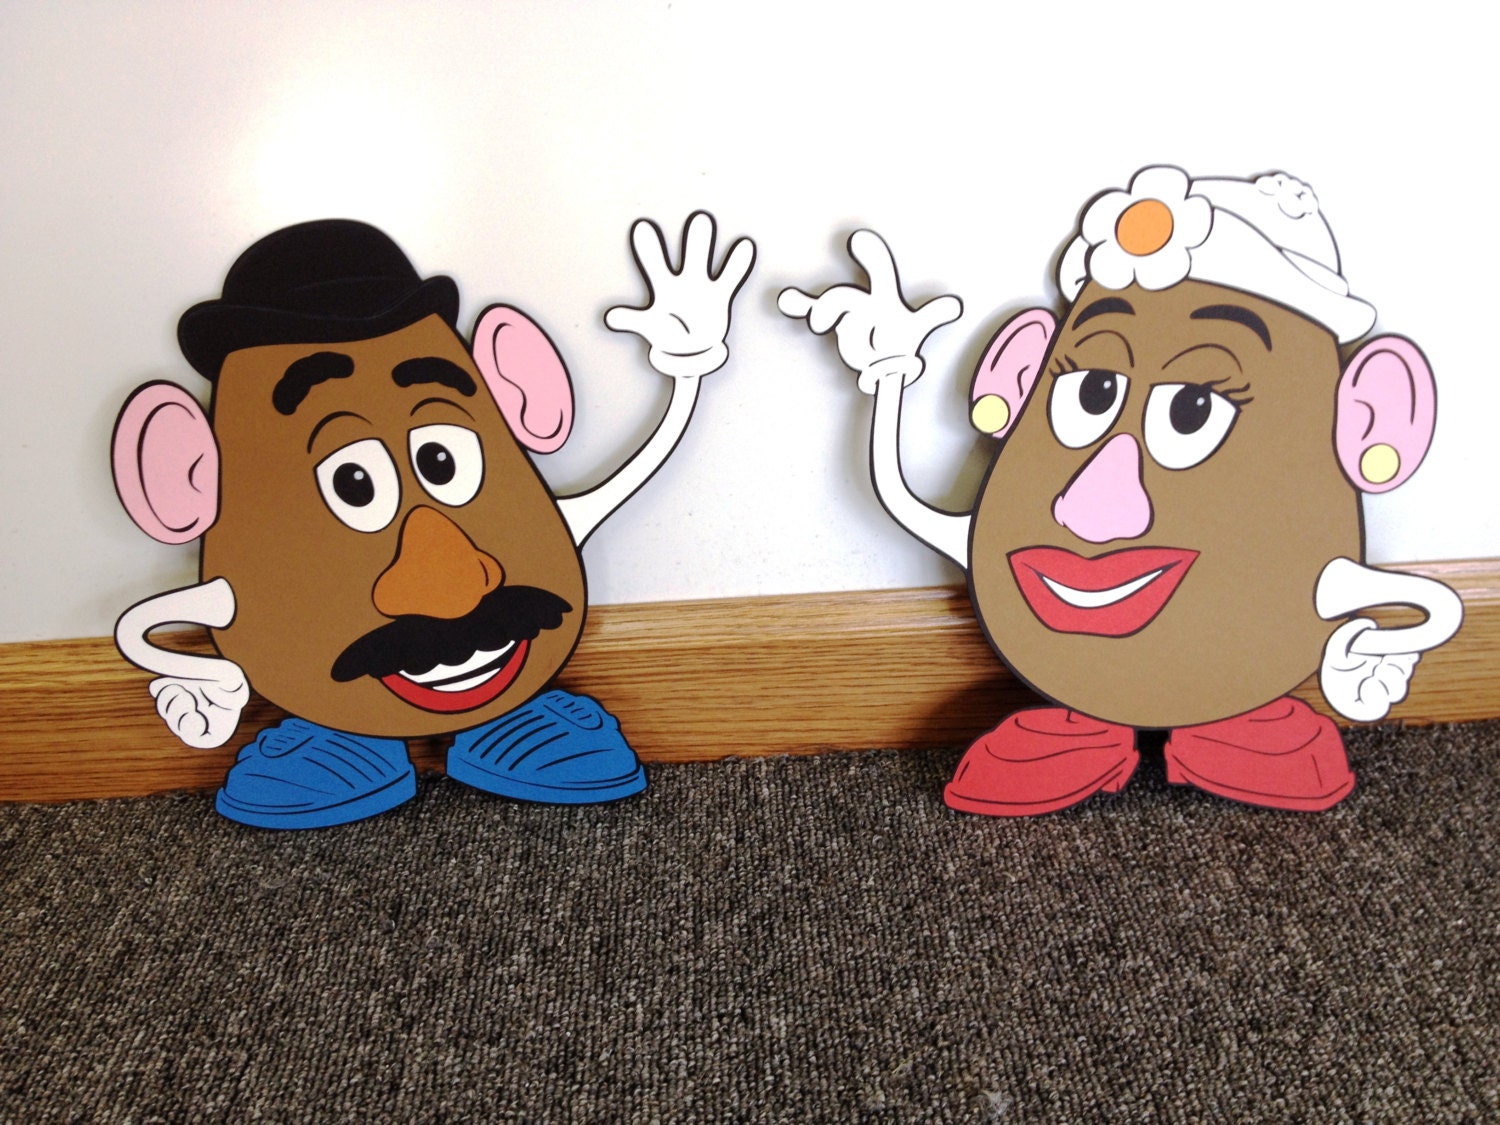 download mr and mrs potato head toy story